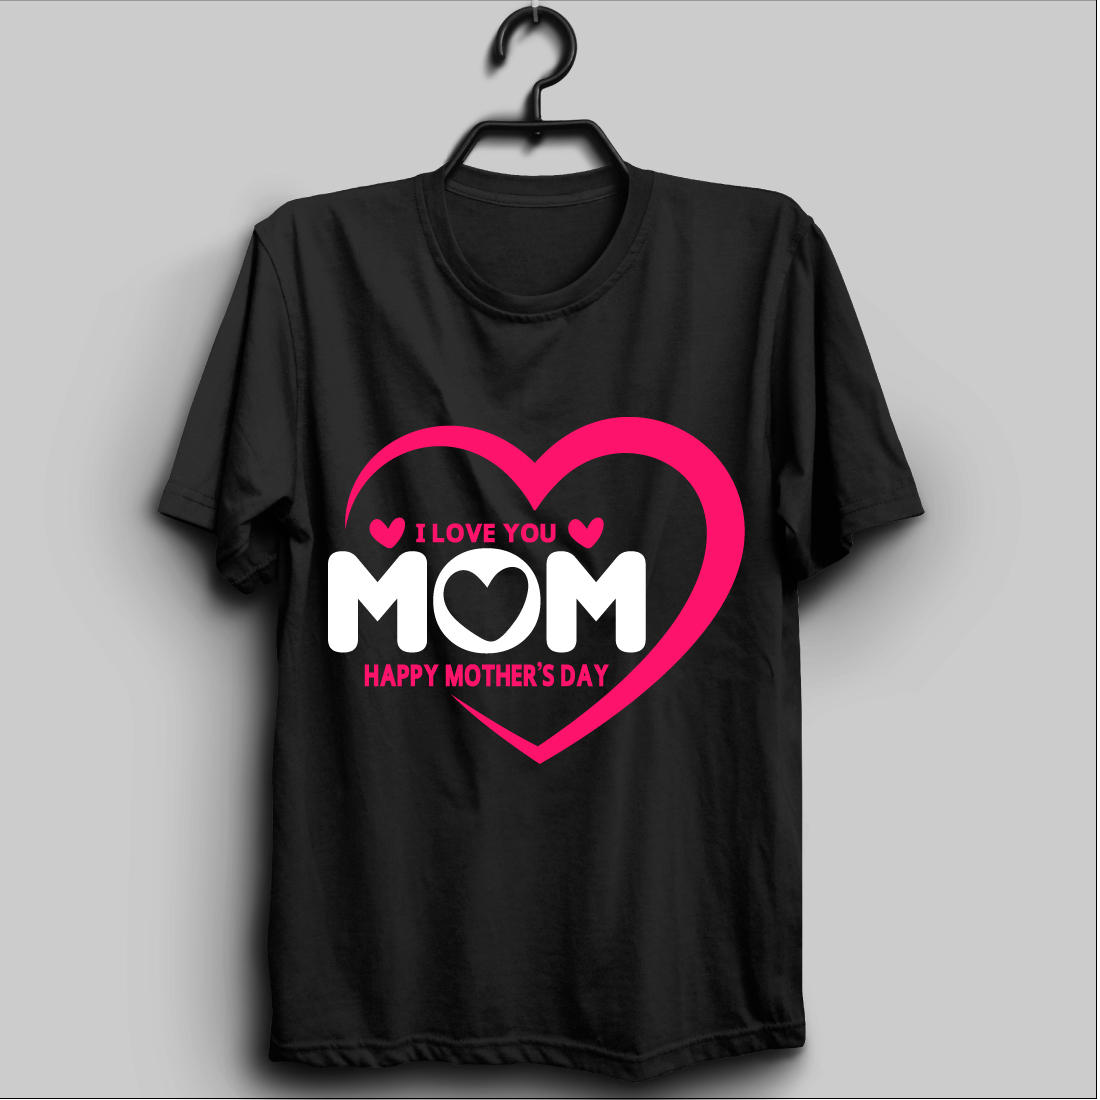 mothers day t shirt design 4 677